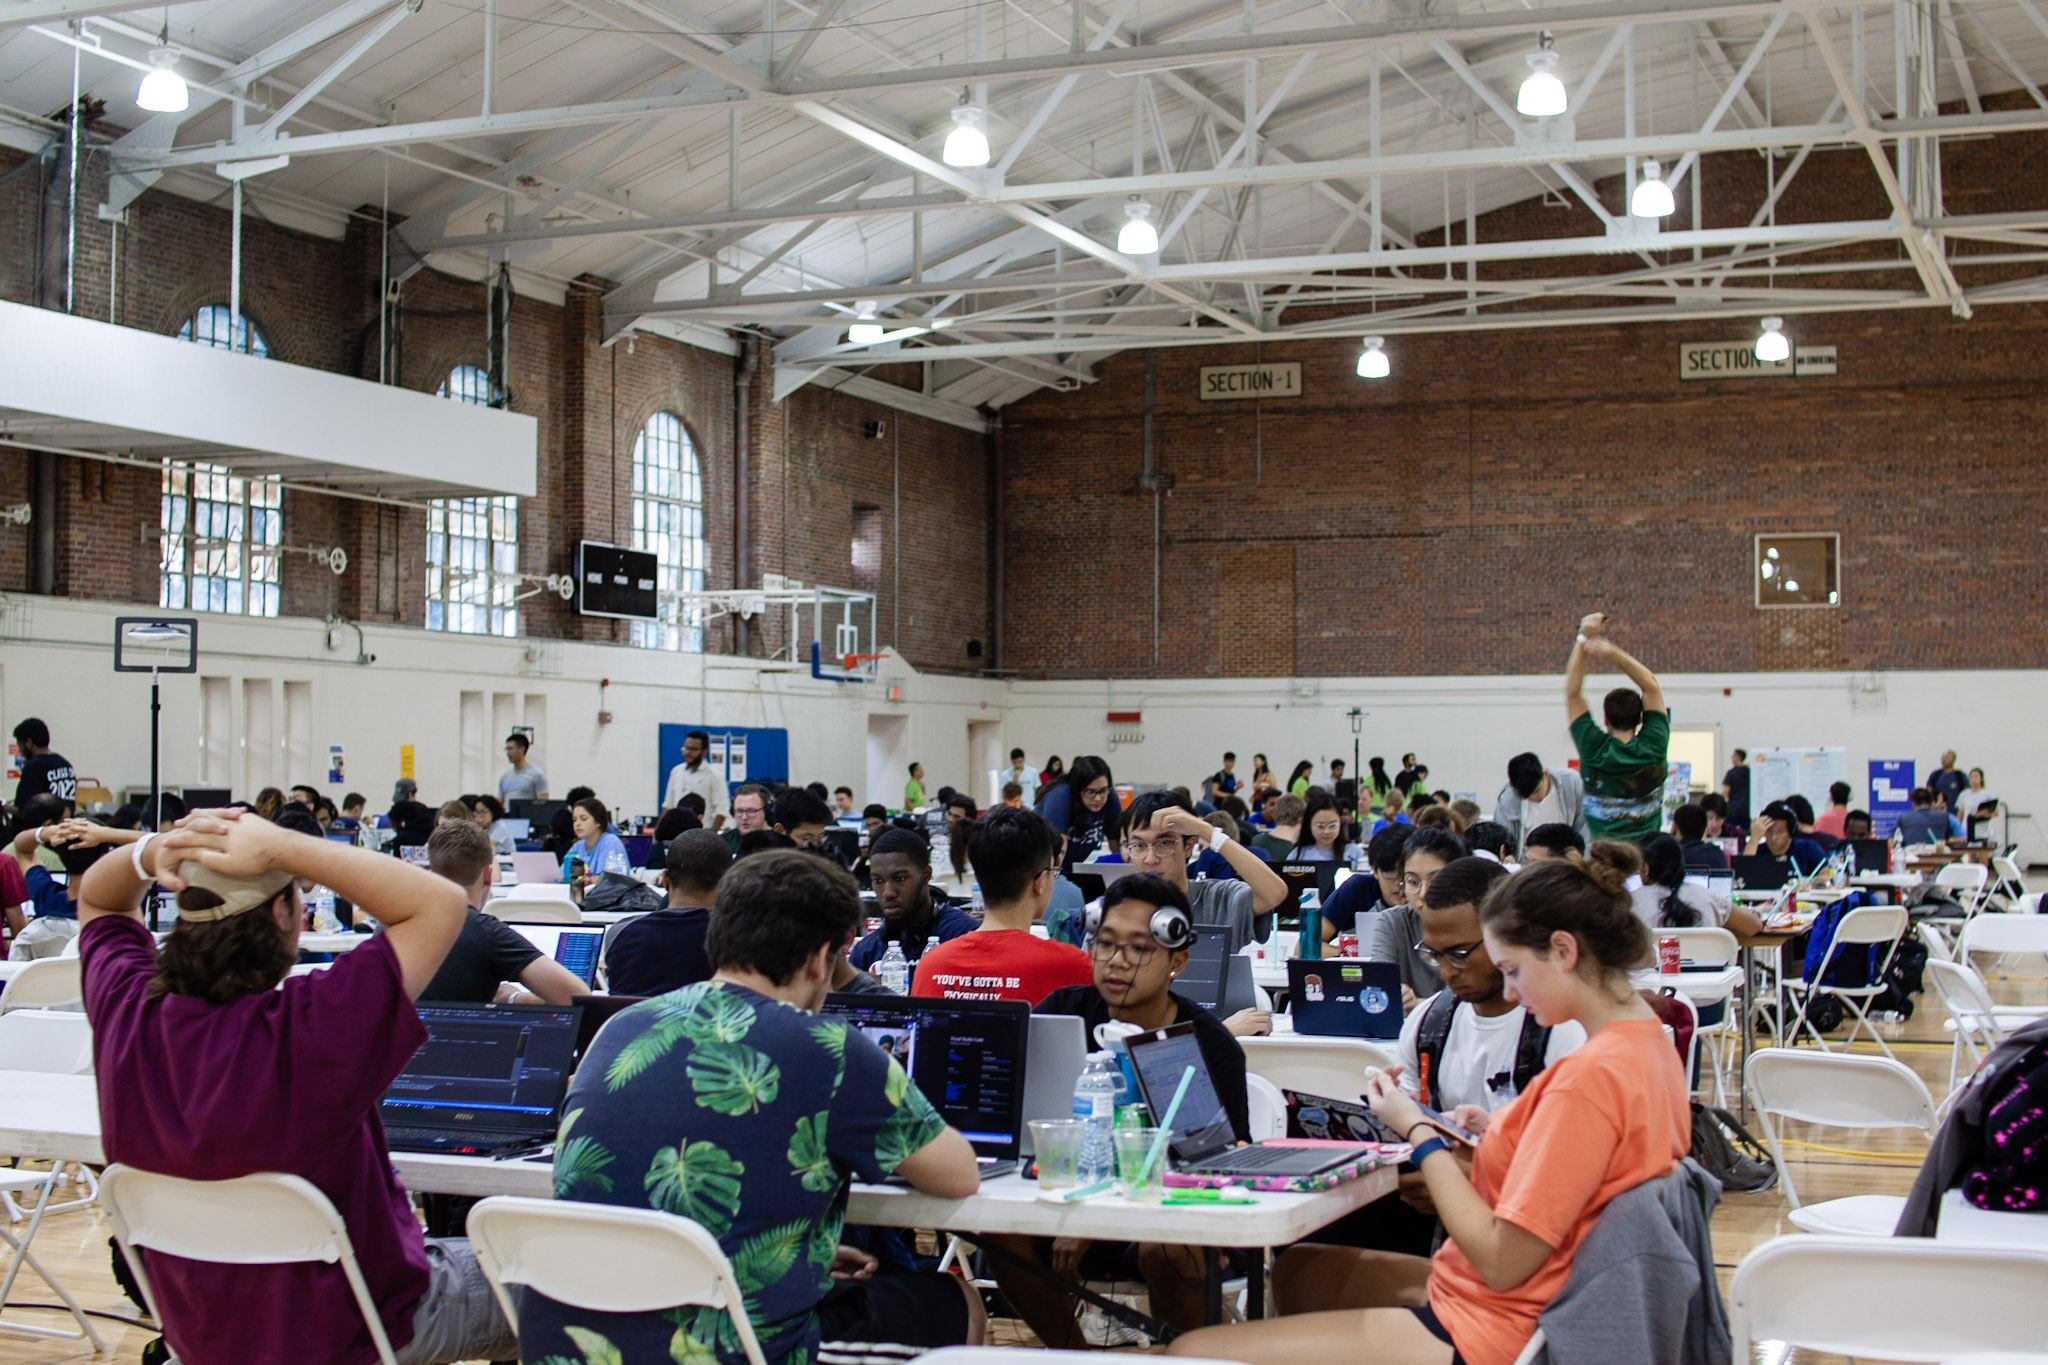 HackNC 2019 competitors work on projects in Woollen Gym. (photo by Austin Wang)